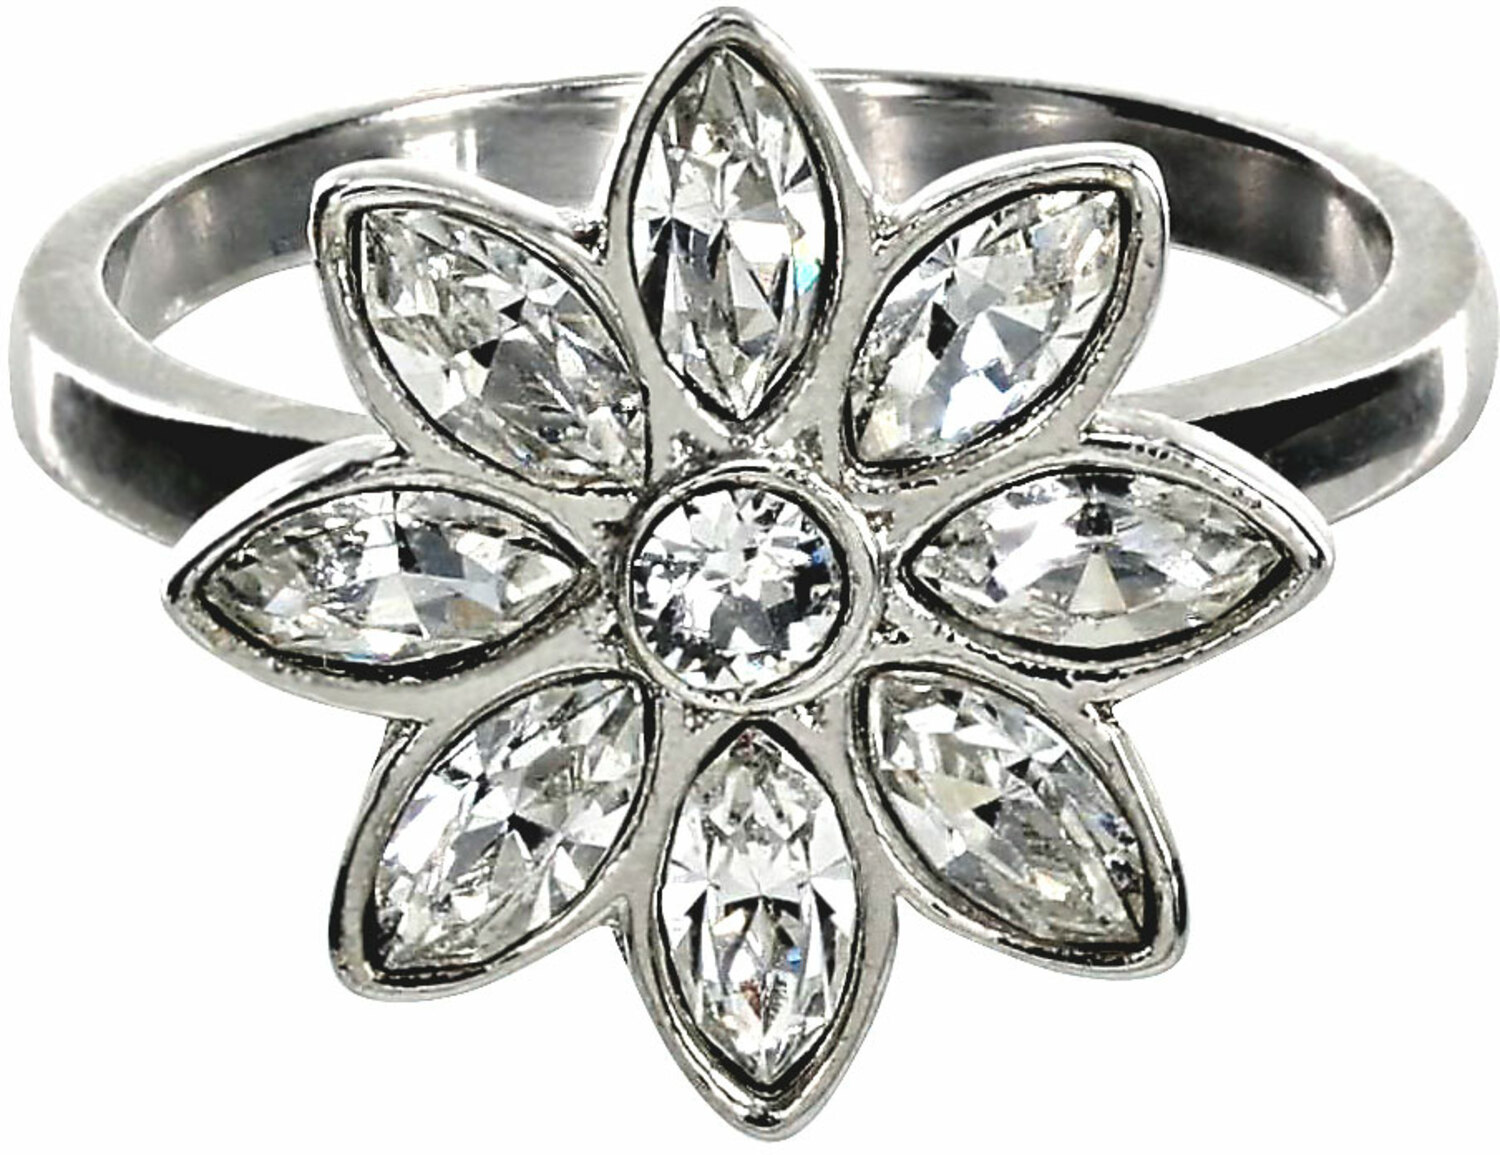 Crystal Flora
in Rhodium by H2Z Made with Swarovski Elements - Crystal Flora
in Rhodium - 1.5 CM Austrian Crystal Ring Size 8